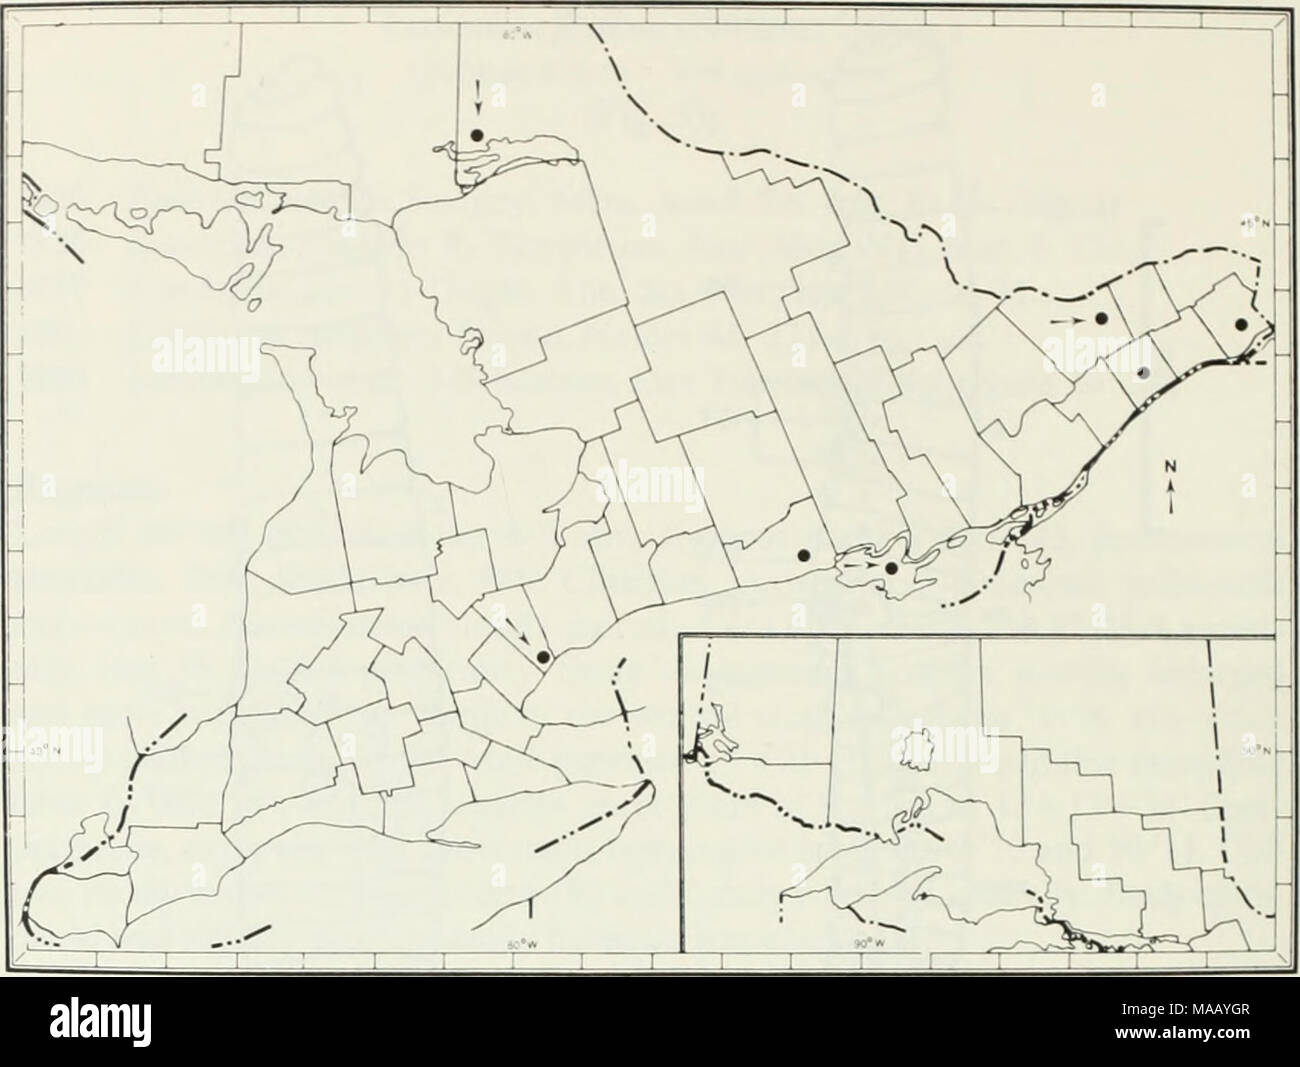 . The earthworms (lumbricidae and sparganophilidae) of Ontario . Fig. 31 The known Ontario distribution of Lumbncus festivus. CARLETON CO. *Ottawa-Carleton Rd 35, 2.42 km s of Leonard, under logs, 11 May 72. JWR. 1- 1-0. DUNDAS CO. *Hwy 31, 3.55 km n of Morrisburg, under lumber, 11 May 72, 0-1-0. GLEN- GARRY CO. *Hwy 34, 11.13 km n of Lancaster, under log, 11 May 72, 1-0-0. *Hwy 34. 5.65 km n of Alexandria, under log, 11 May 72, JWR, 0-0-1. NIPISSING DIST. *Hwy 17. 1.29 km e of Ver- ner, under paper in wet ditch, 13 May 72, JWR &amp; JEM, 2-1-0. NORTHUMBERLAND CO. *Hwy 45. Baltimore, under jun Stock Photo